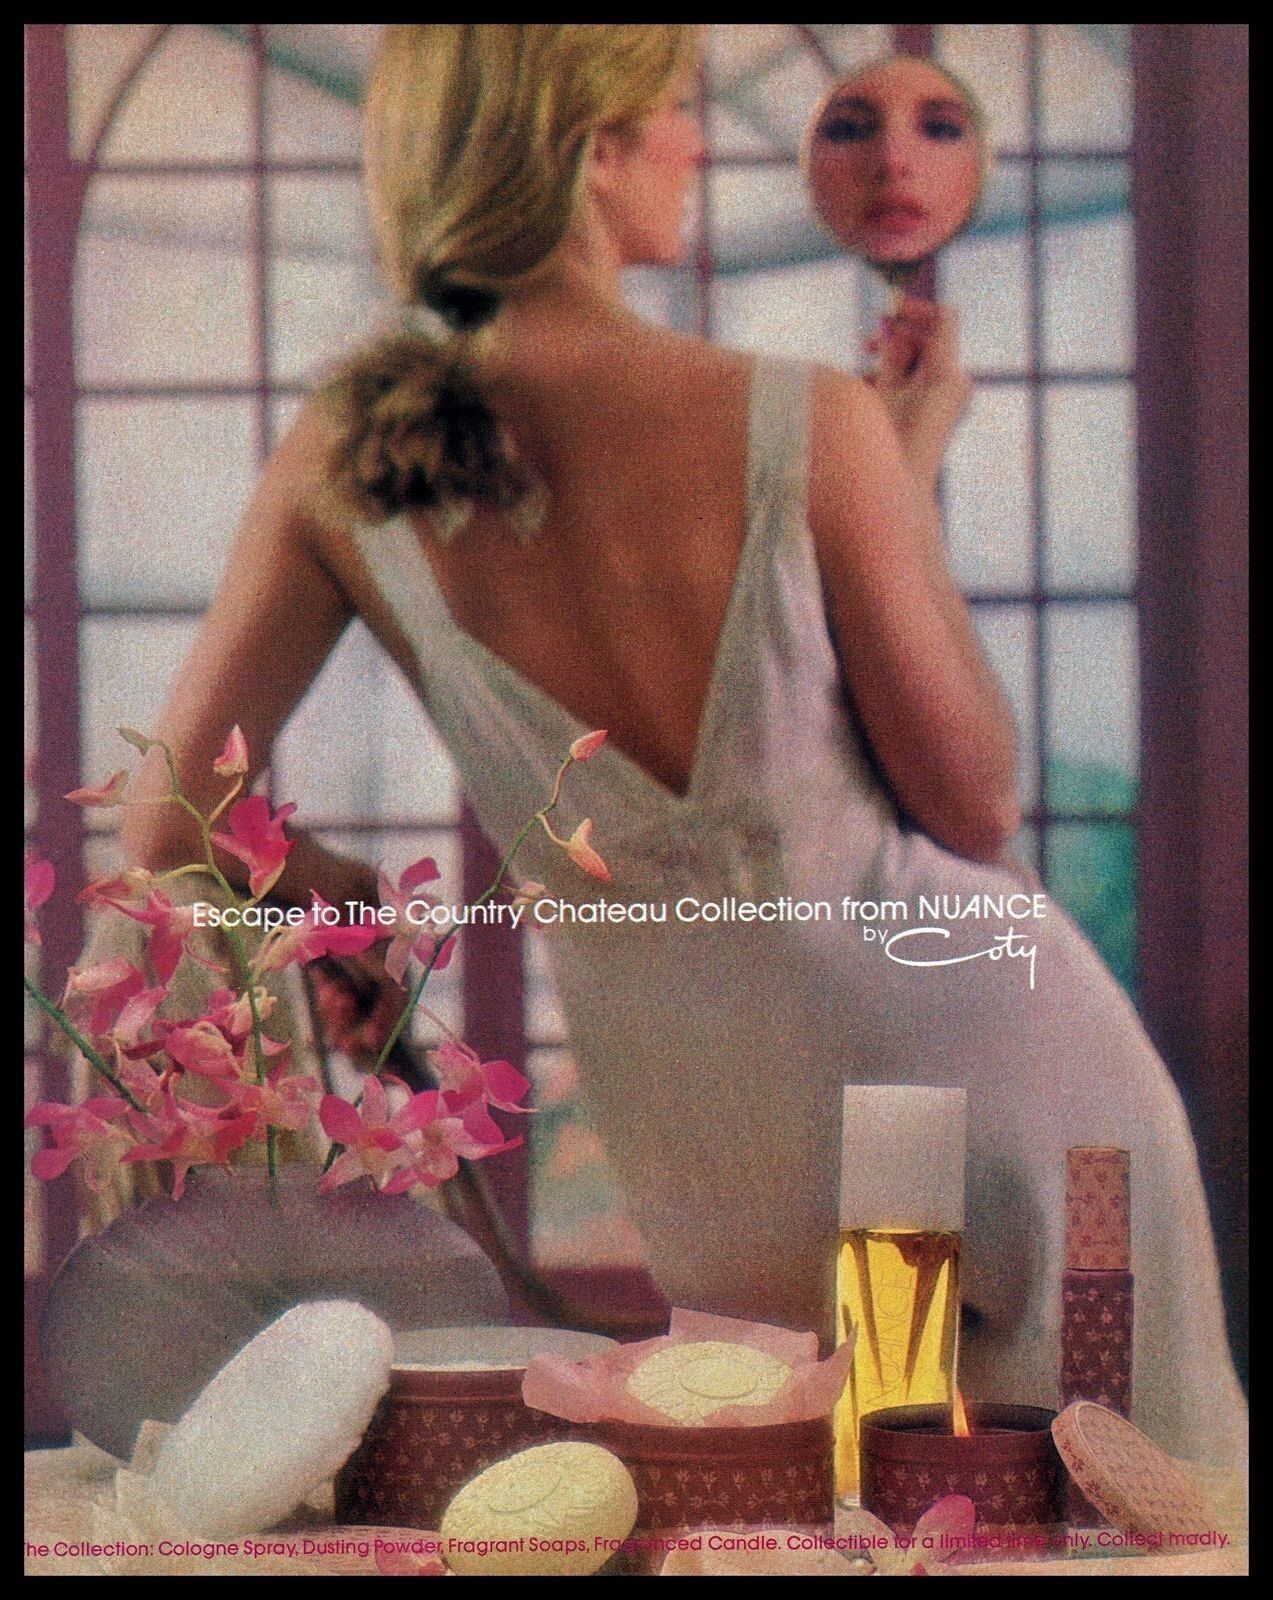 1983 Coty Nuance Perfume Vintage PRINT AD Country Chateau Collection Woman 1980s